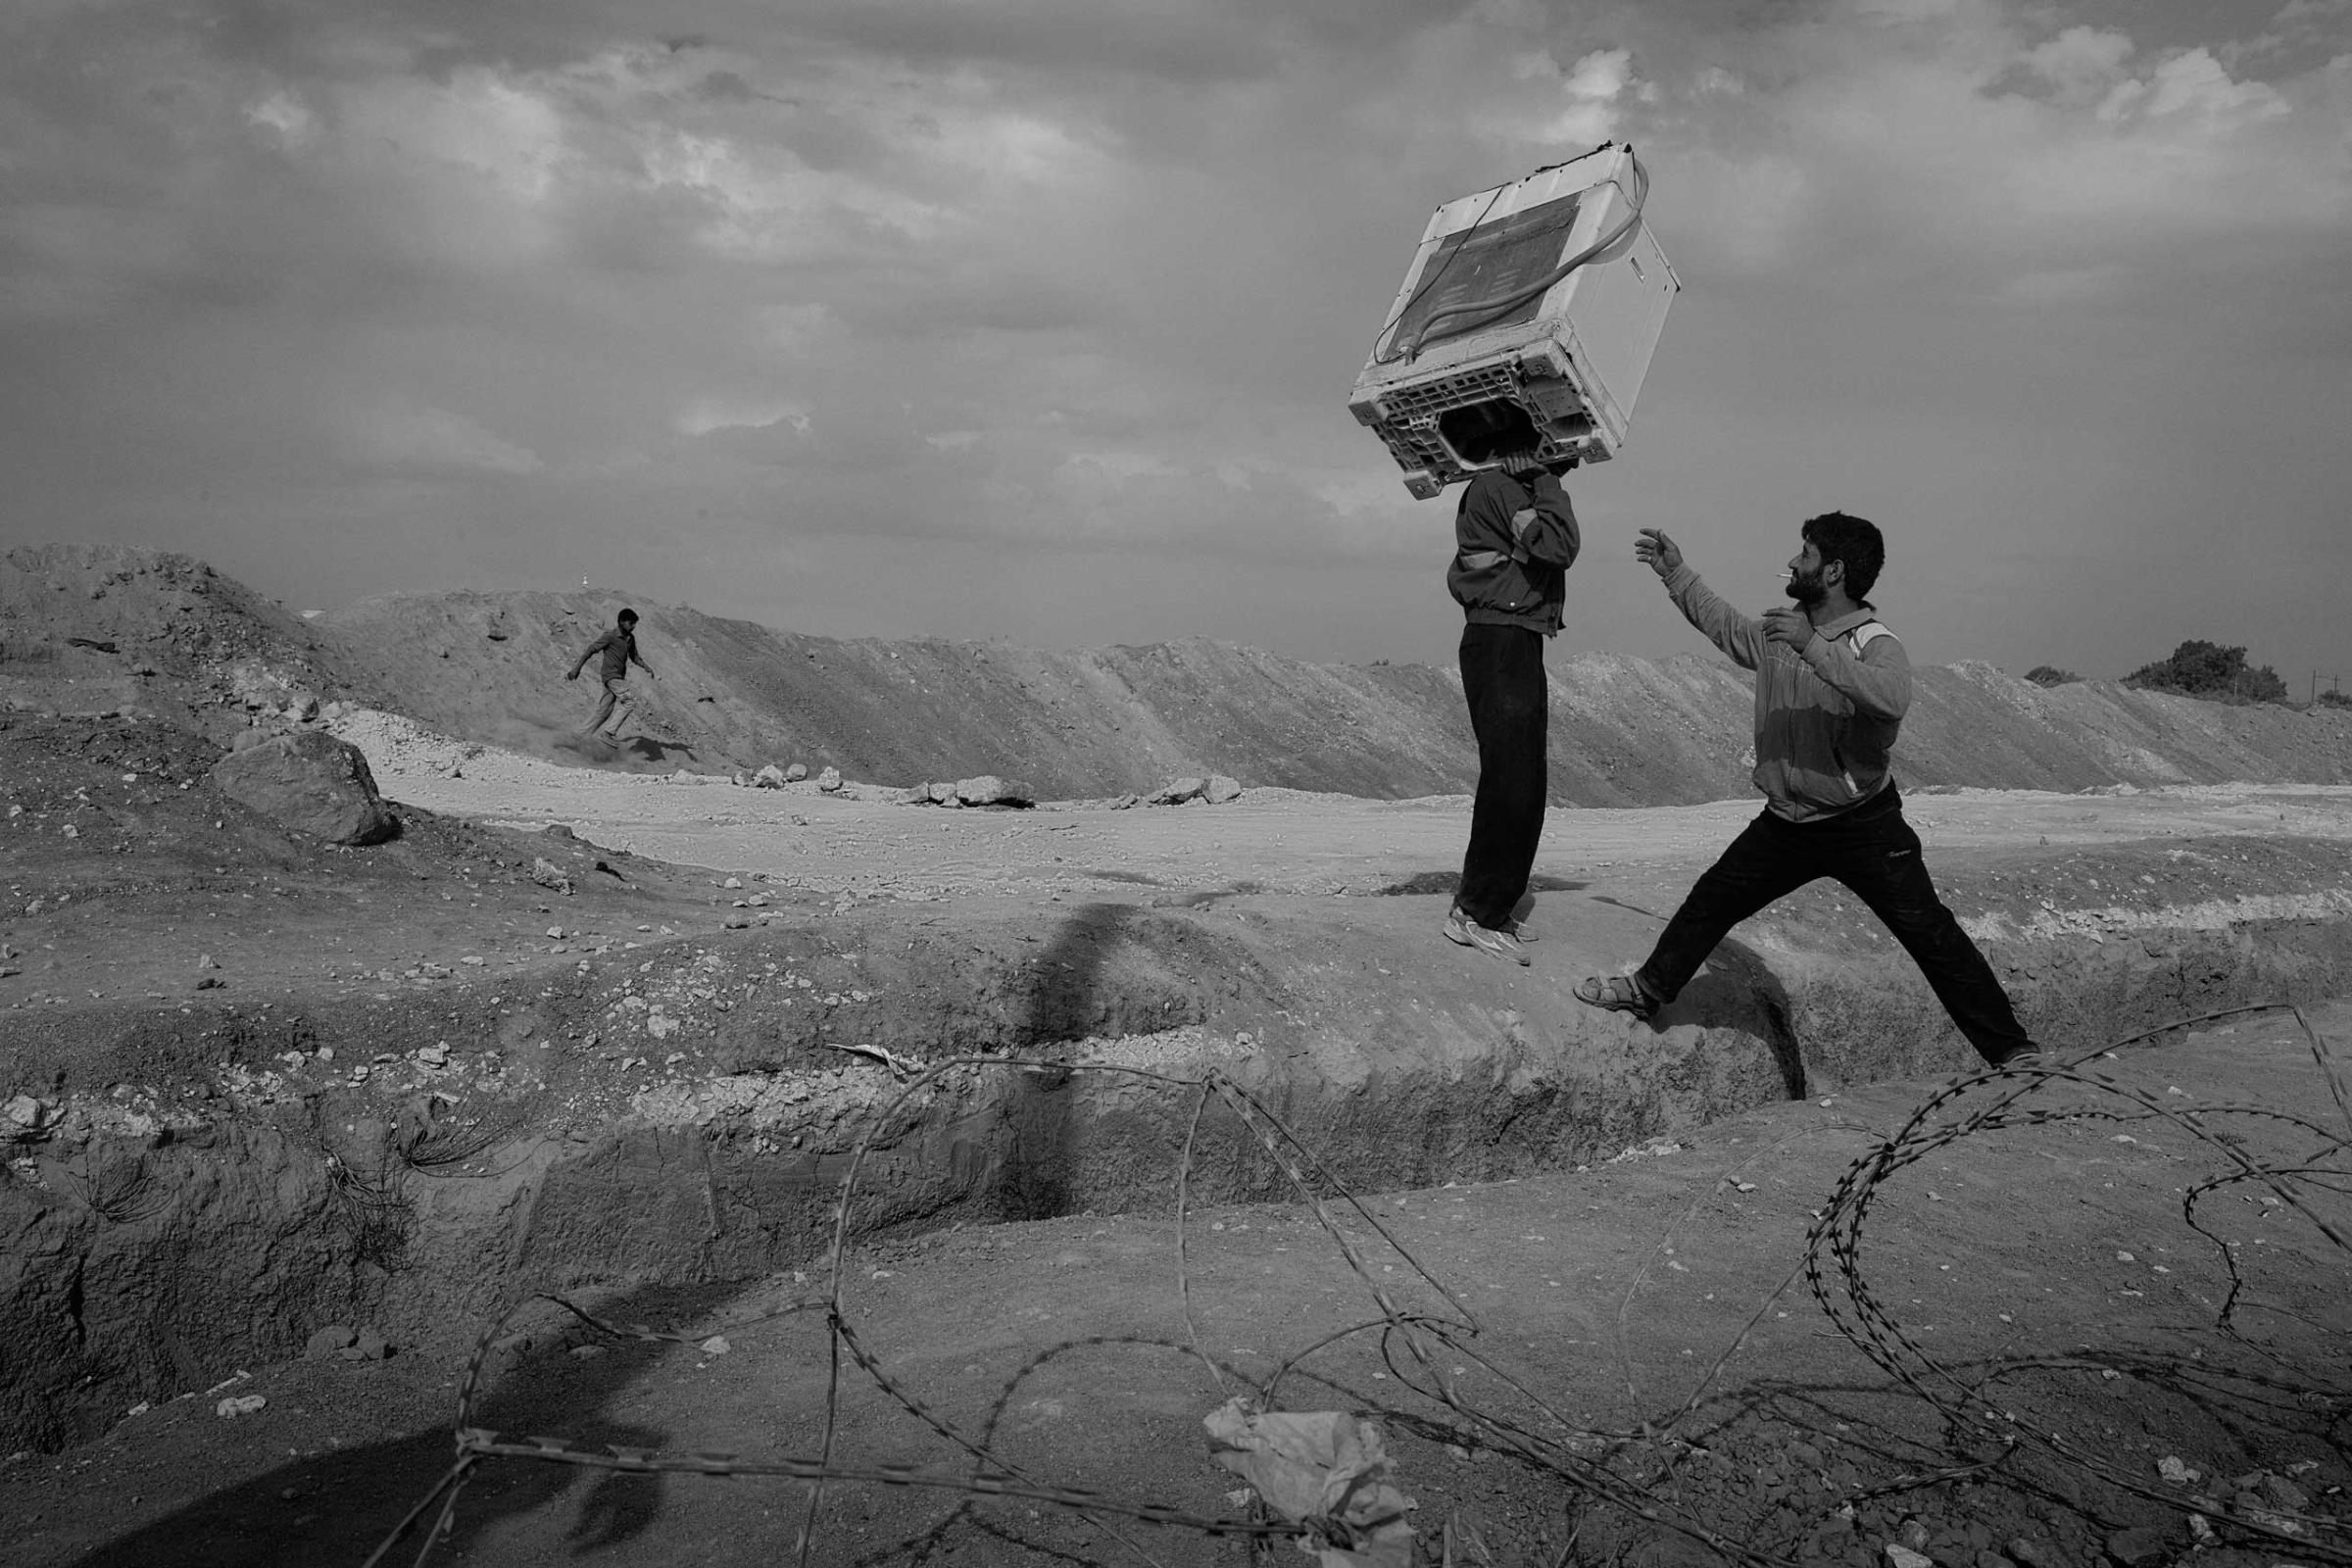 December 2013. Za'atari refugee camp, Jordan. Refugees carry an oven into the camp after bartering or selling goods for it in Jordan.